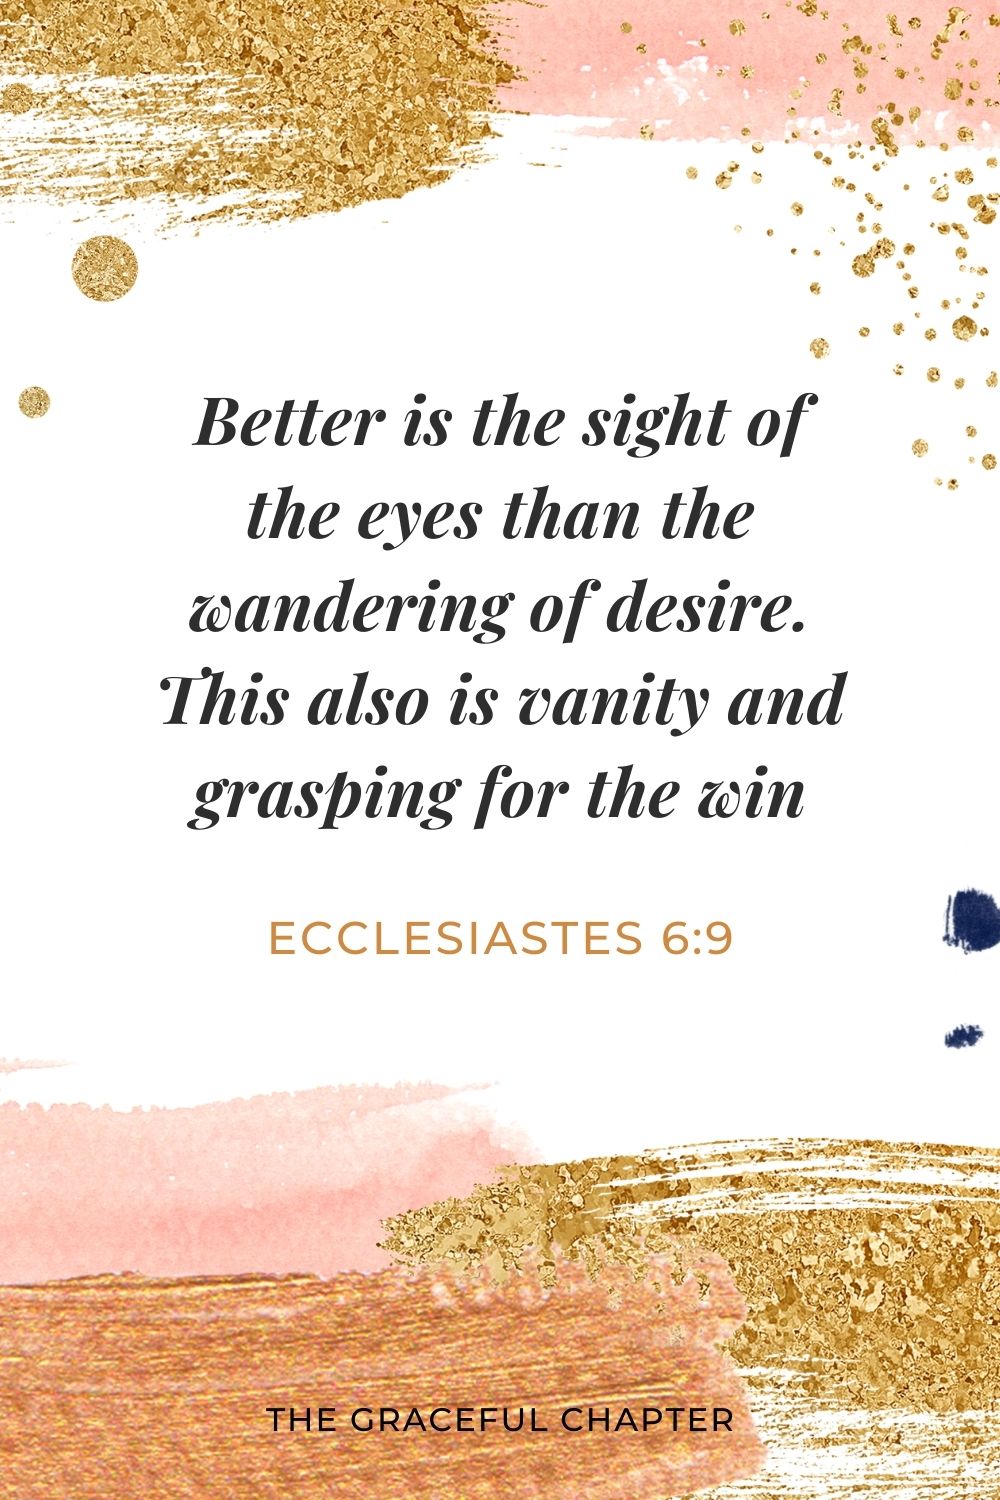 Better is the sight of the eyes than the wandering of desire. This also is vanity and grasping for the win. Ecclesiastes 6:9